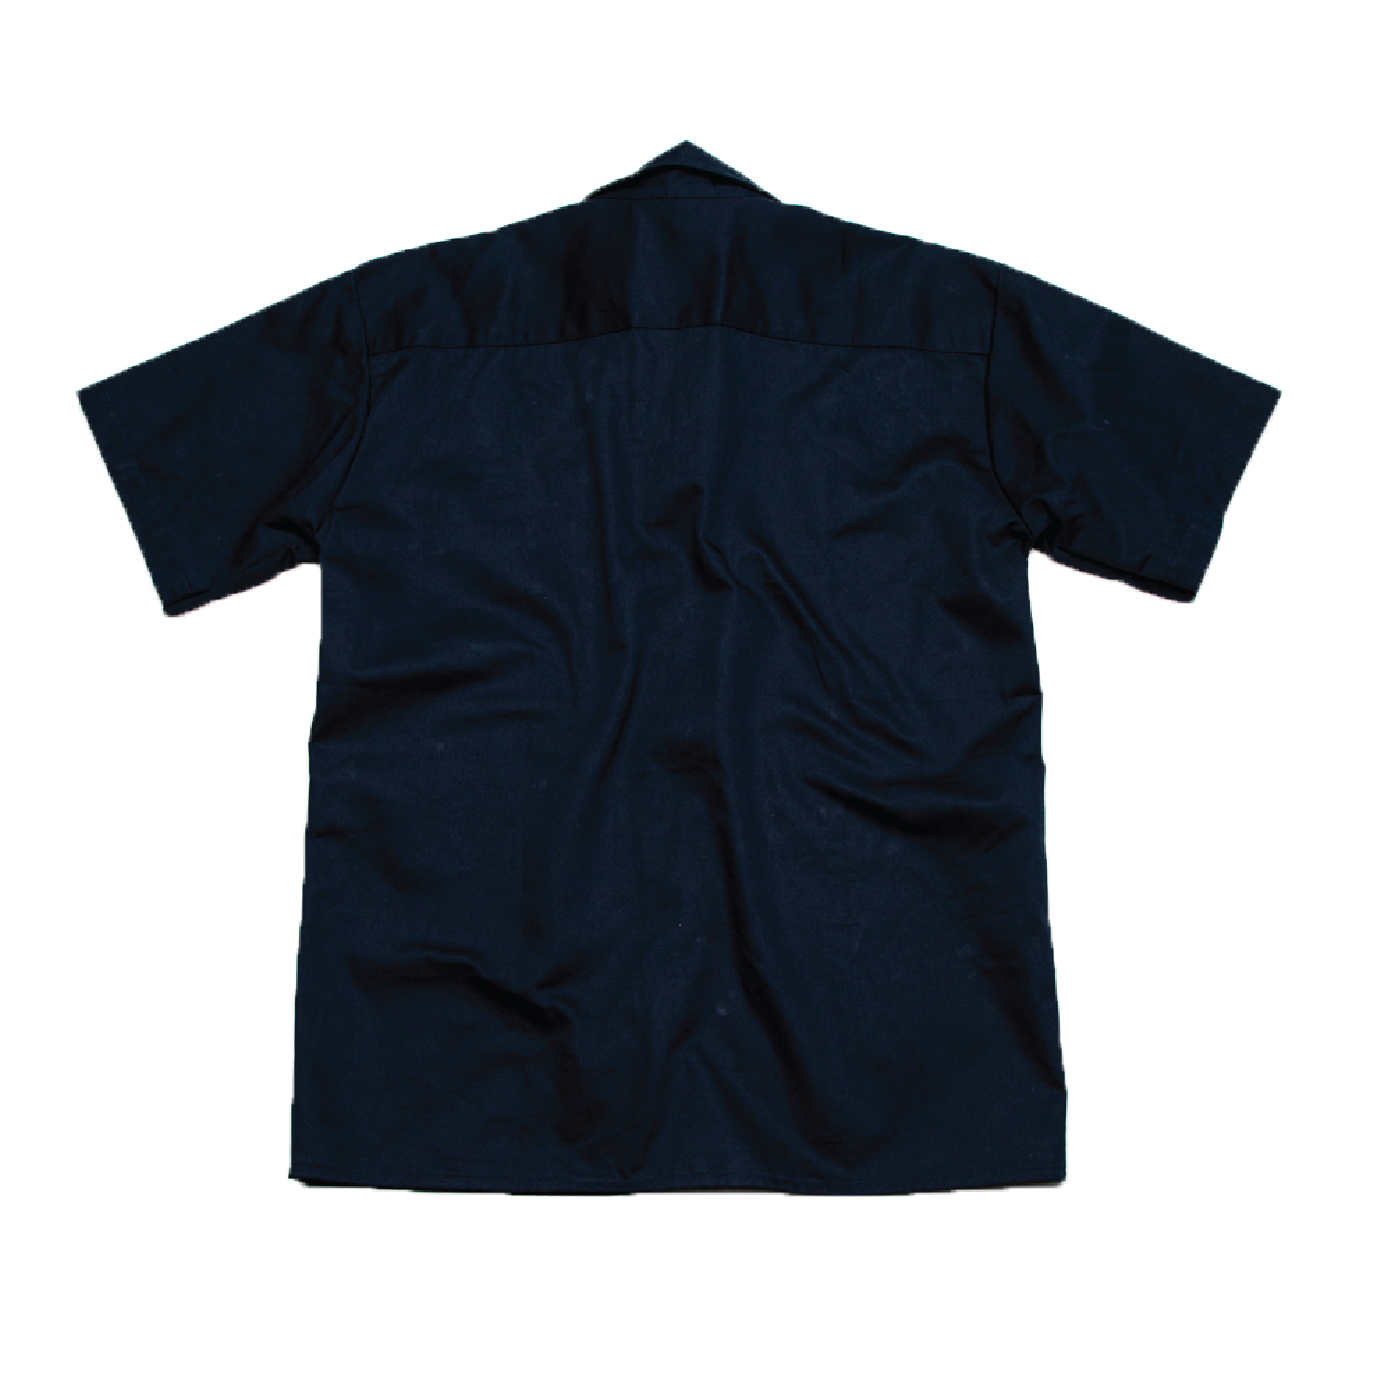 Thomas Surfboards & Captain Sip Sops Colab Stay Bold Work Shirt Navy